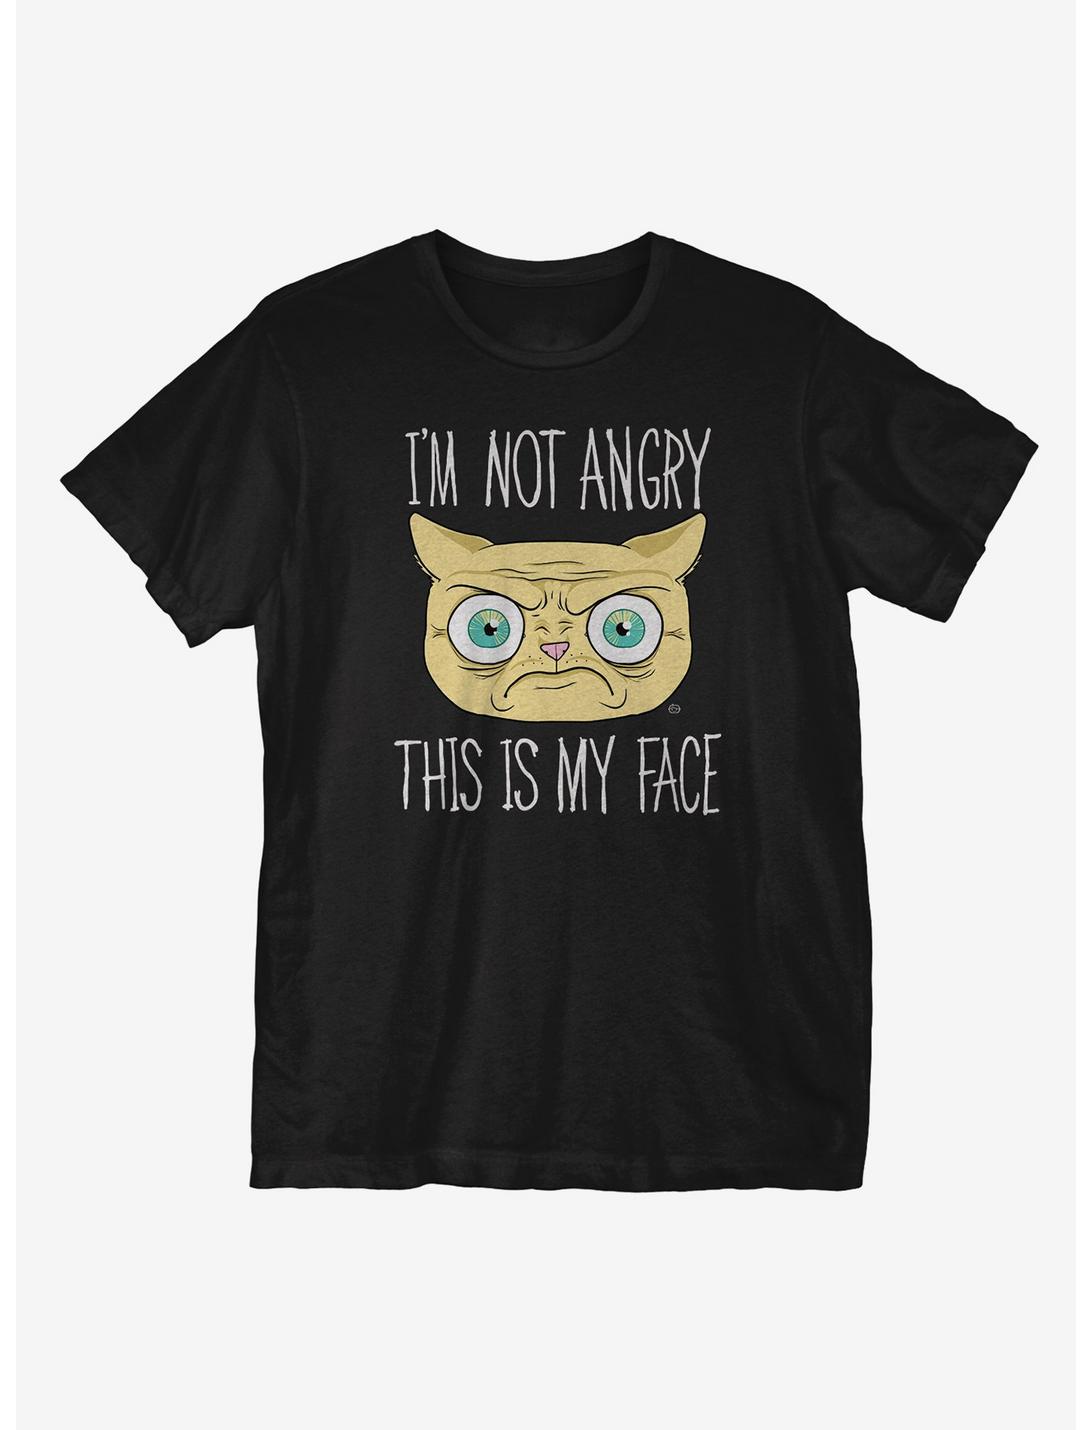 This Is Just My Face T-Shirt, BLACK, hi-res